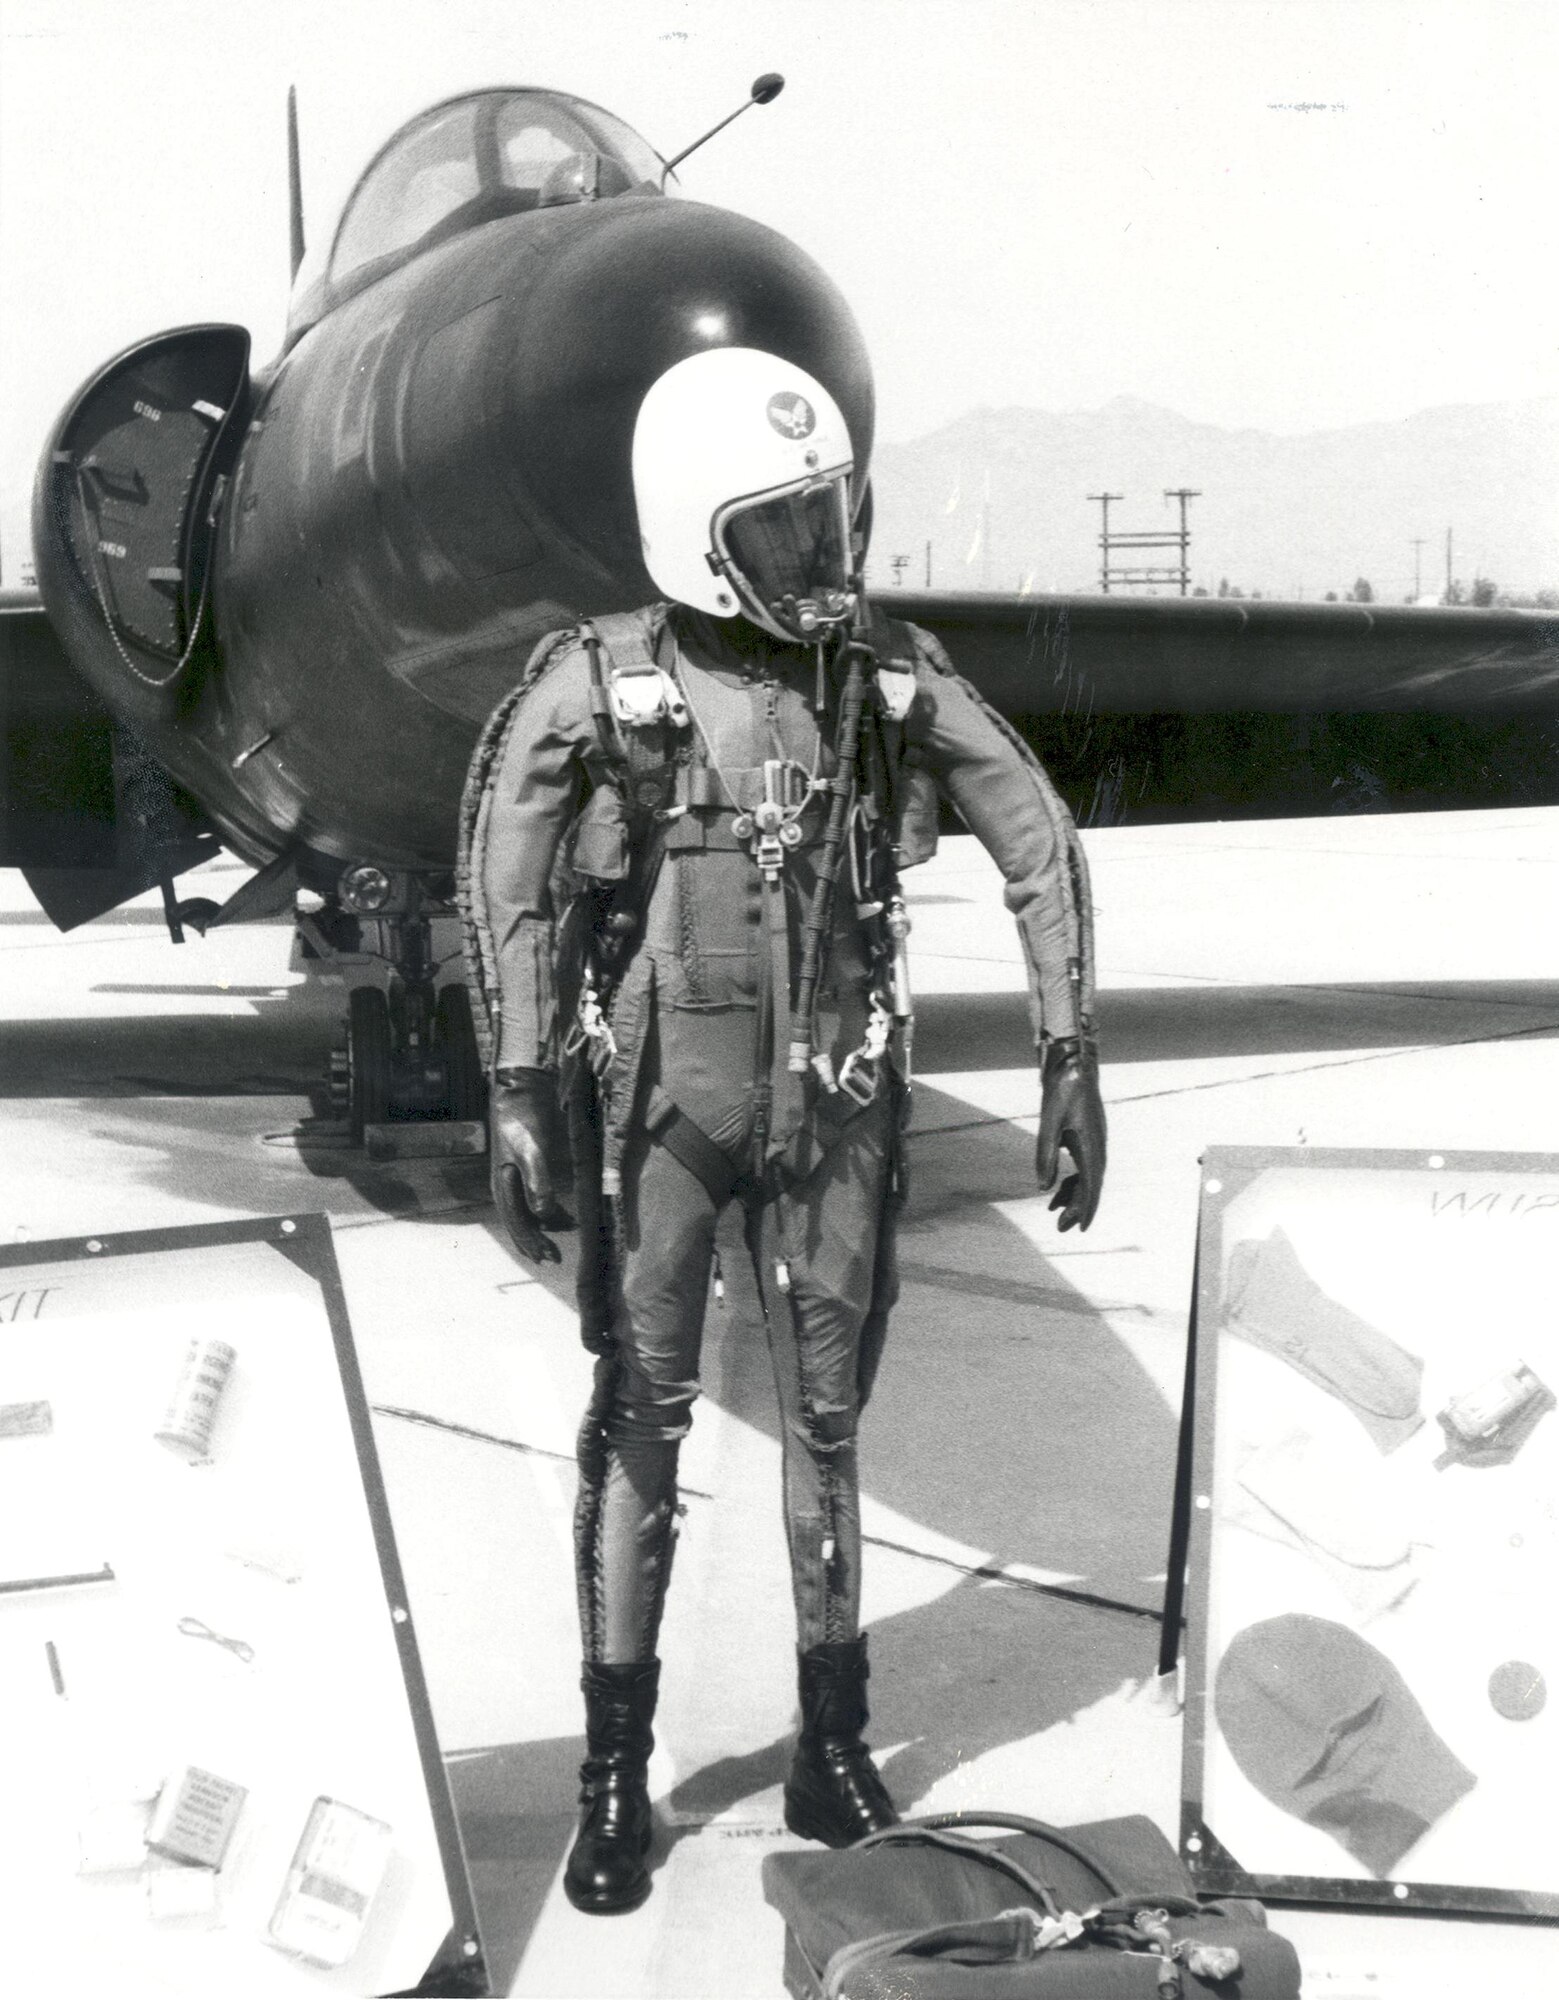 Pressure suits like the one pictured here help protect pilots at high altitudes. When U-2 pilots flew at Laughlin (1957-1963) they would have worn suits like these. You can see one up close at the entrance to the Anderson Hall auditorium in building 320! (Courtesy photo by Robert Marcell)